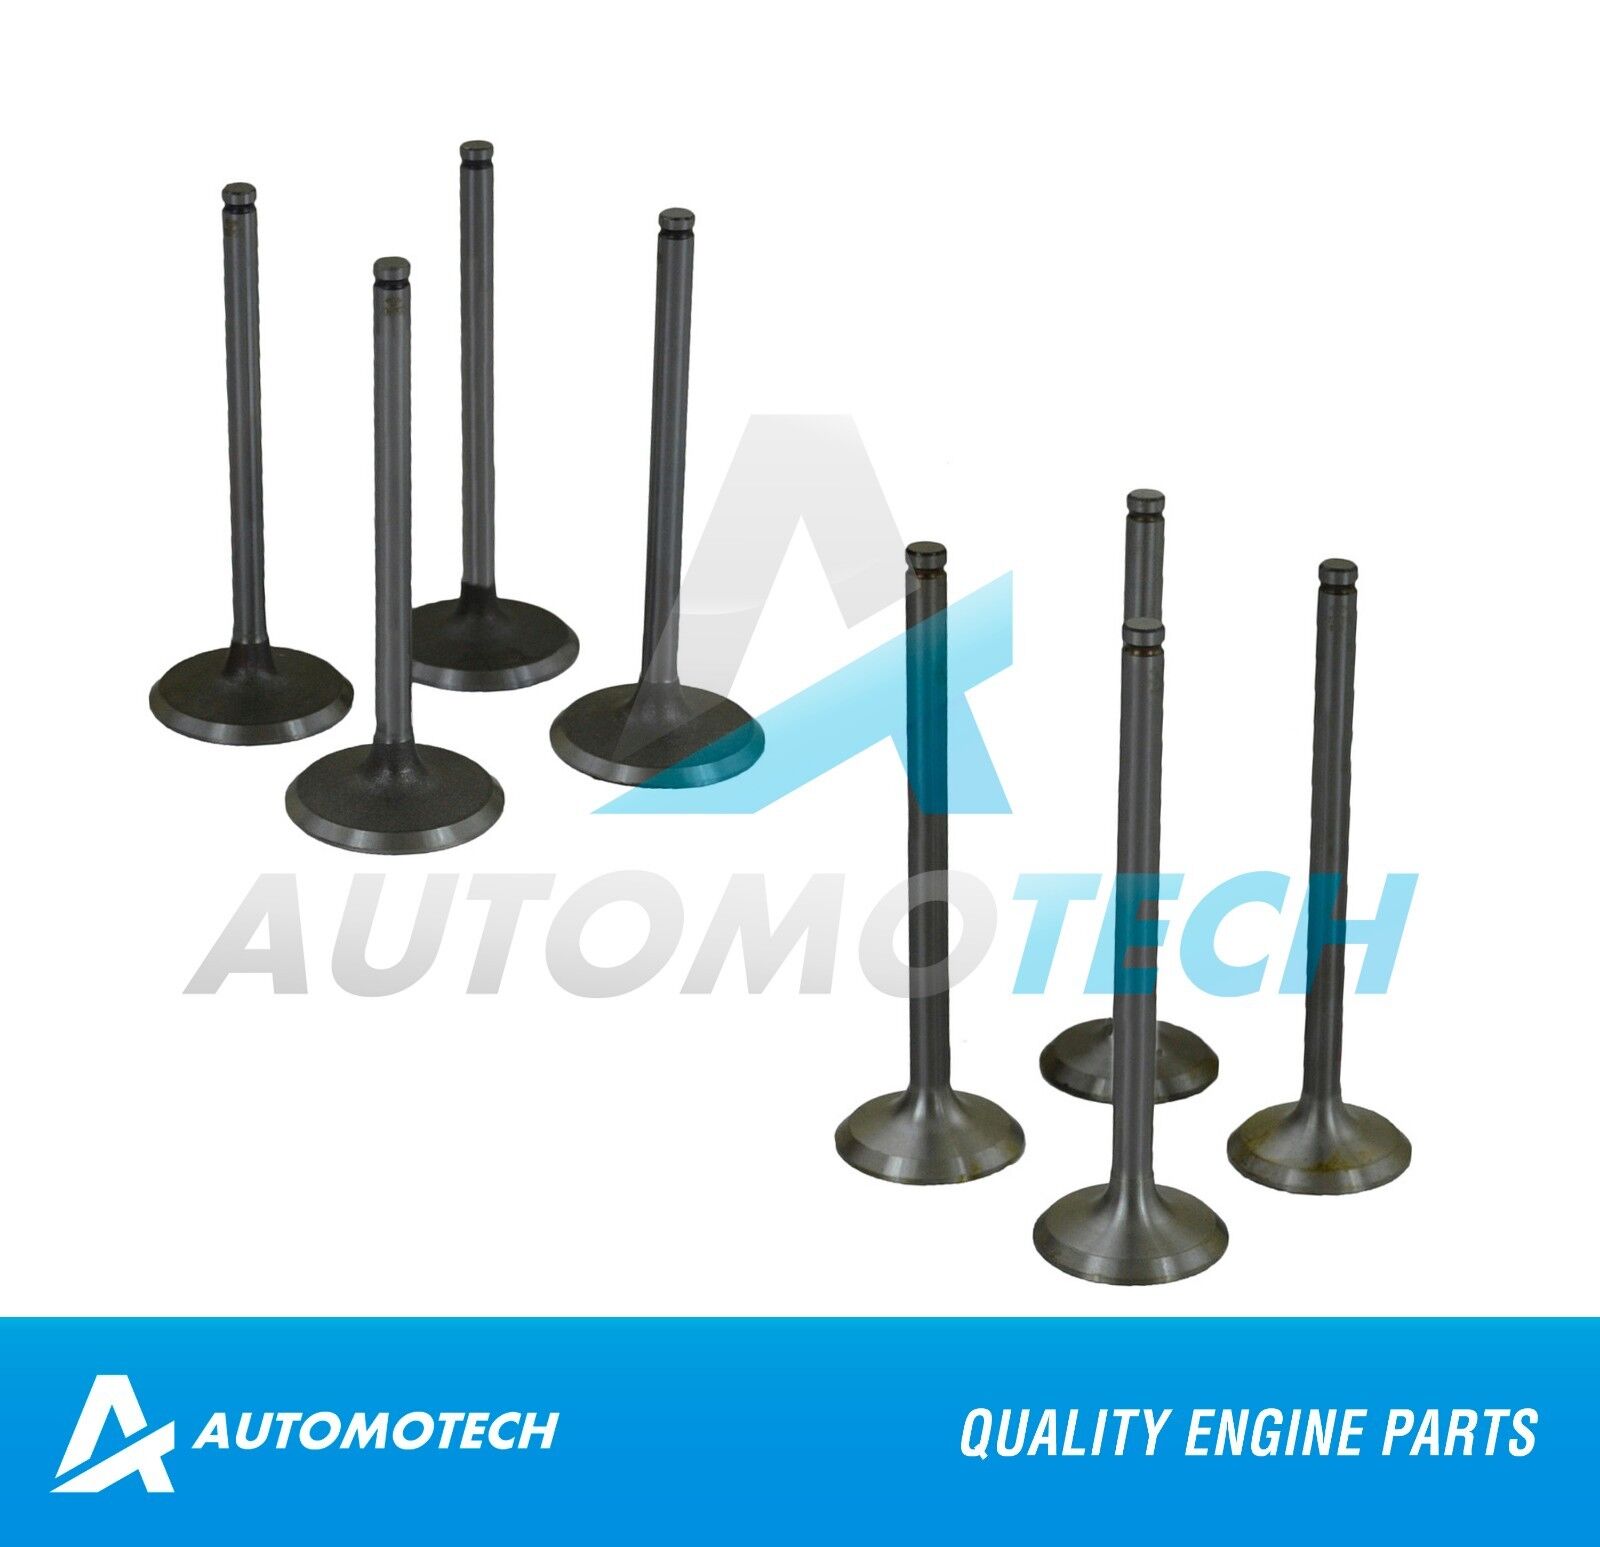 Intake Exhaust valve 1.9 L for Ford Escort Tracer